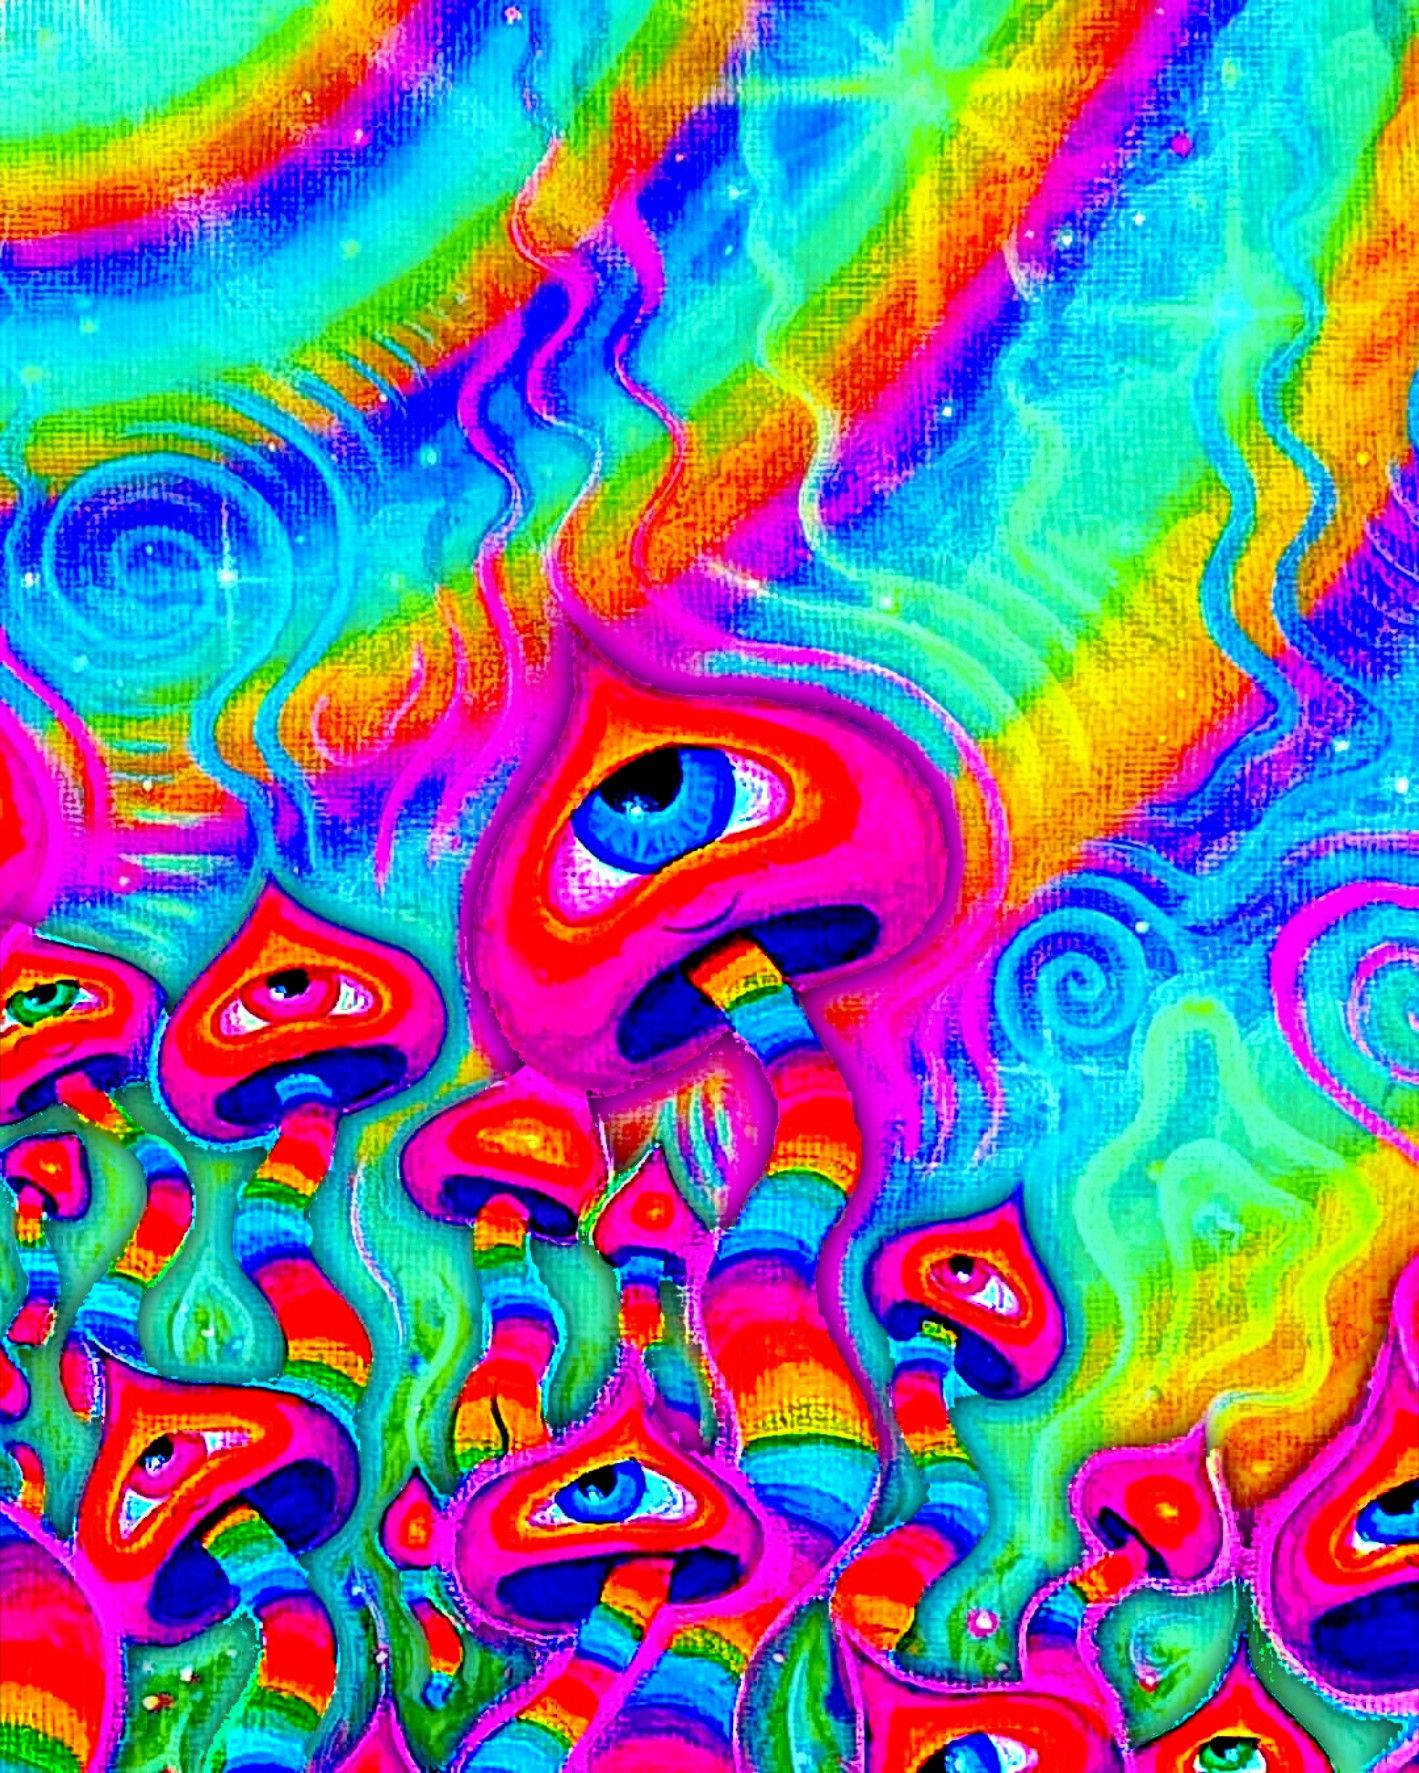 Visit Aesthetic Trippy and explore its visually stimulating world. Wallpaper